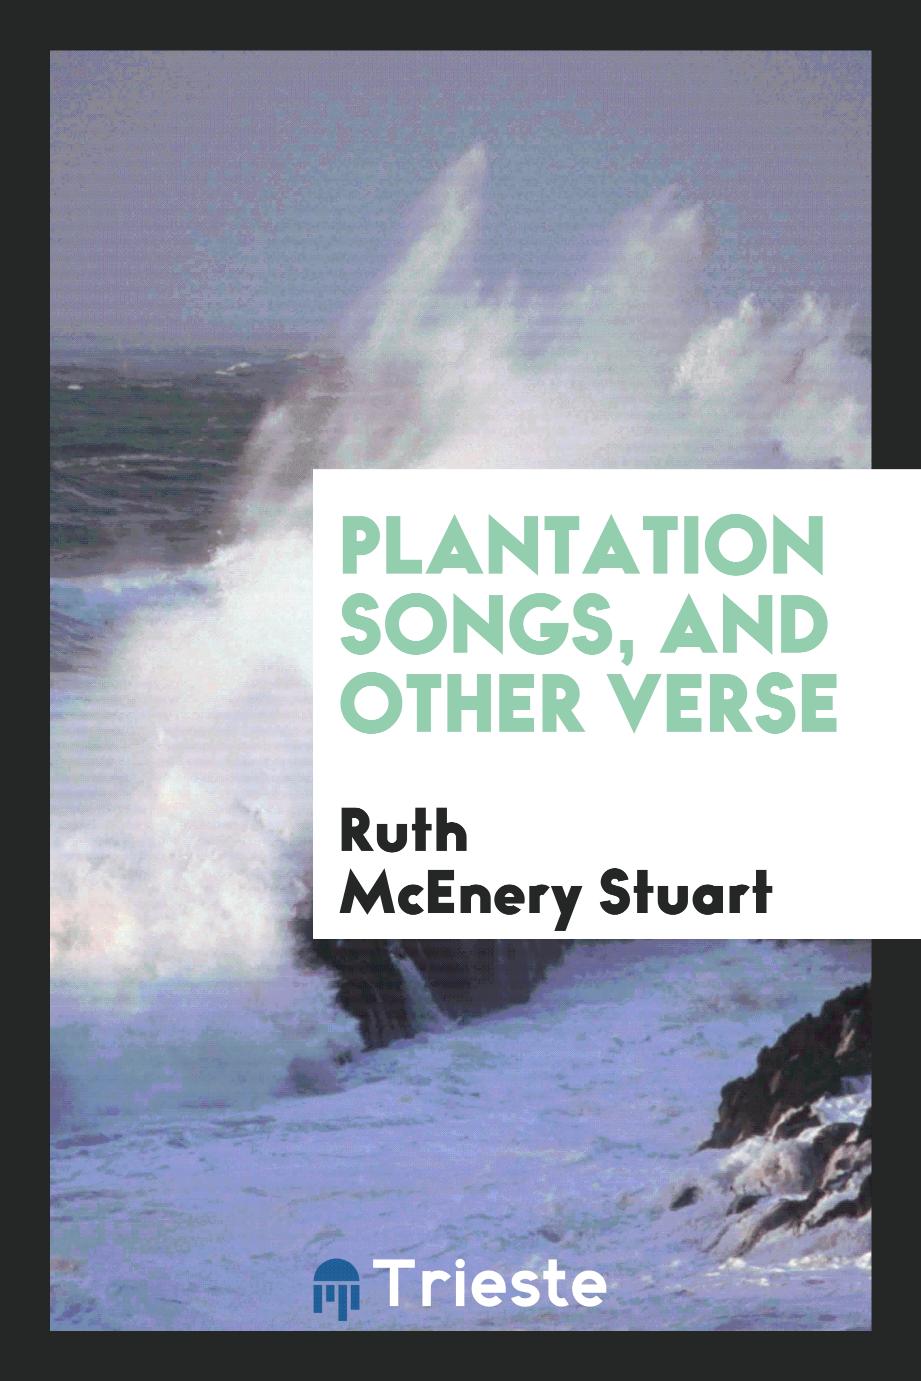 Plantation songs, and other verse